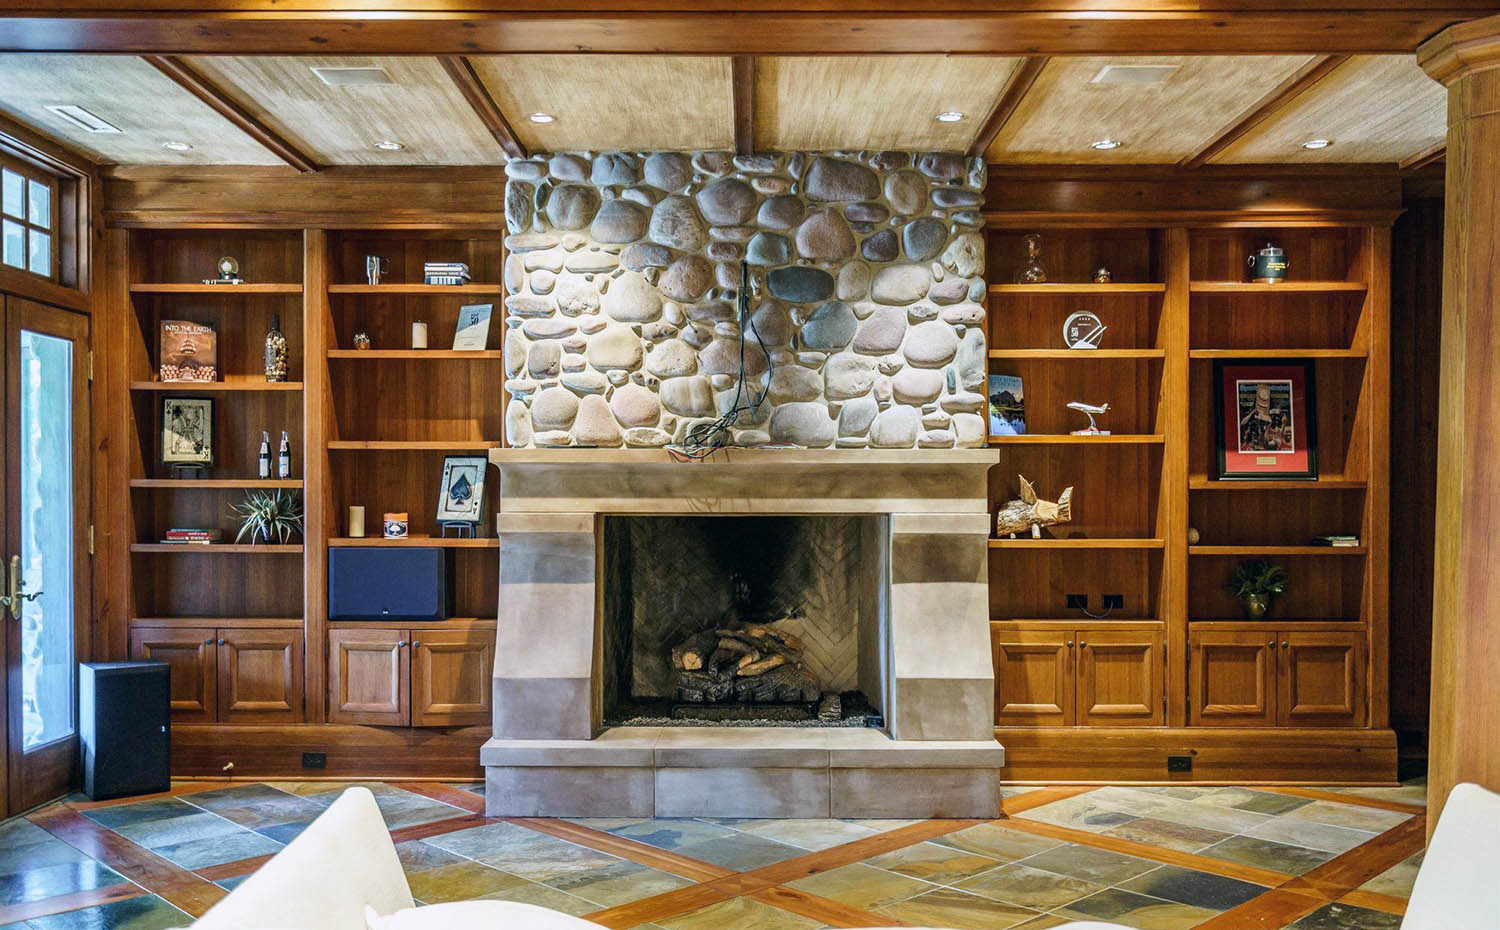 Room with all wood walls and ceiling. Real stone fireplace surround. Custom wood built ins.